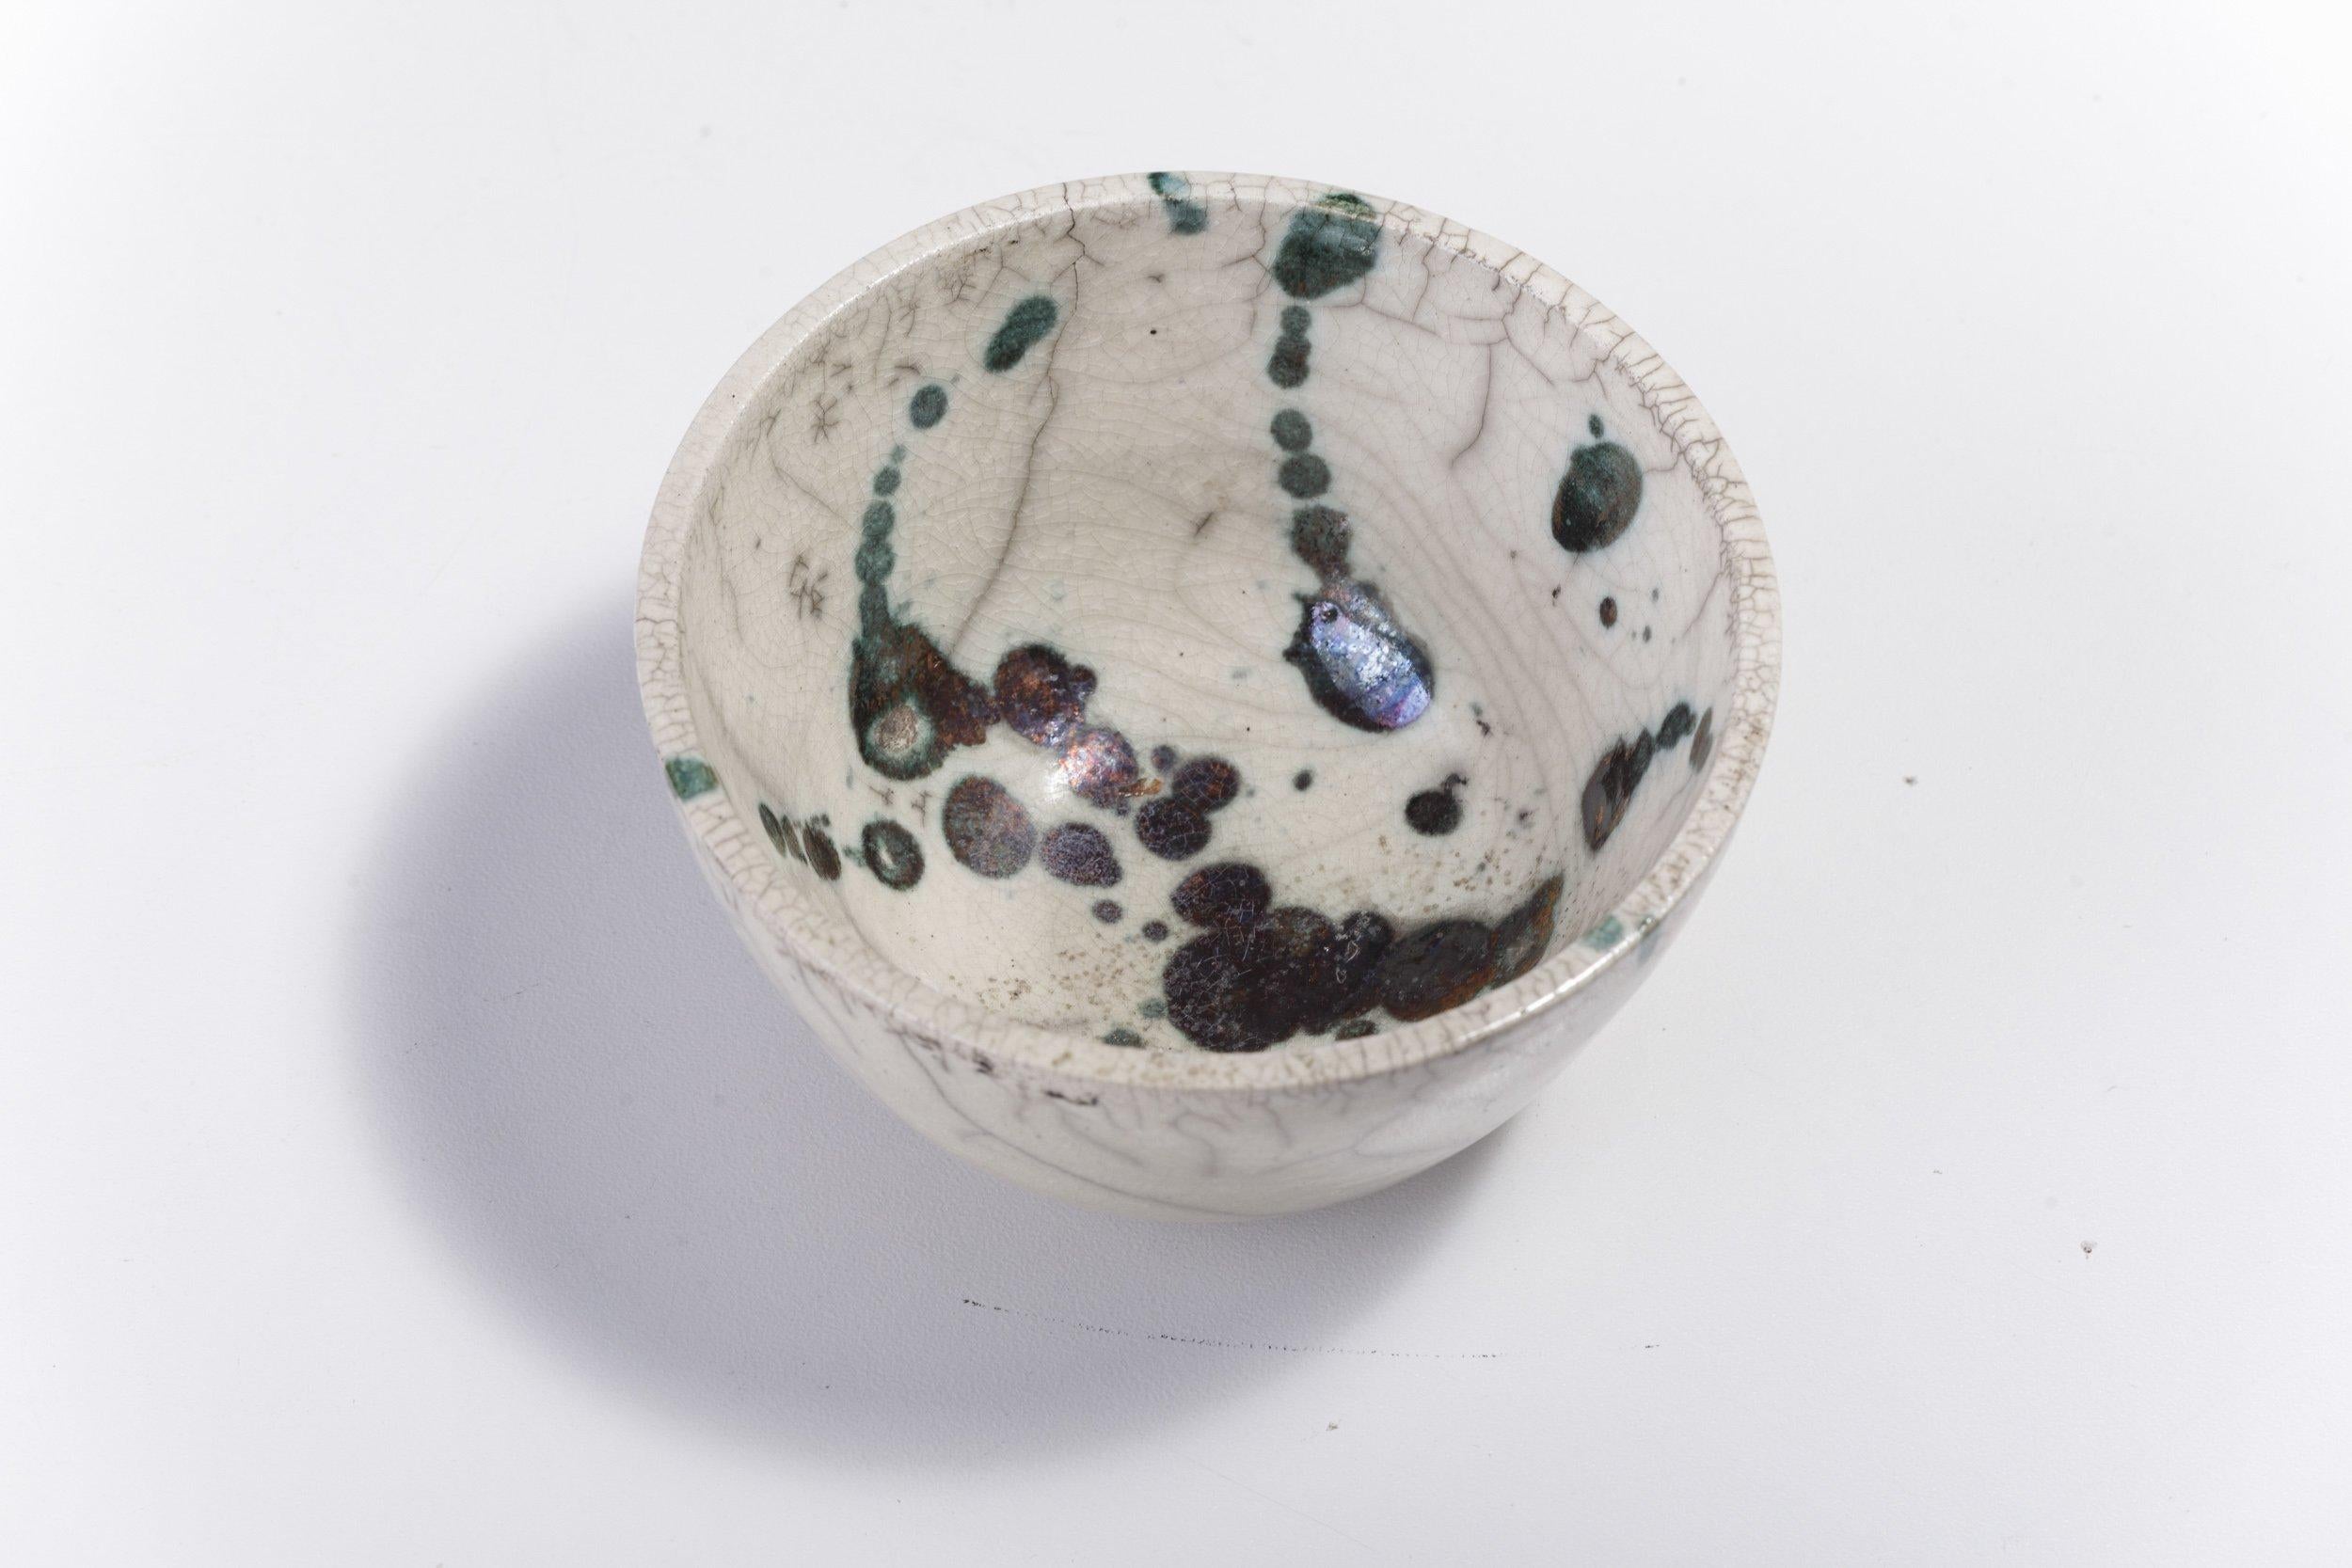 Moss Bowl

A visually impressive yet soft play of shades describes the mesmerizing flair of this spectacular bowl, marked by a natural white color enriched with rusty green spots and a gray patchwork. A unique objet d'art, it is handcrafted of